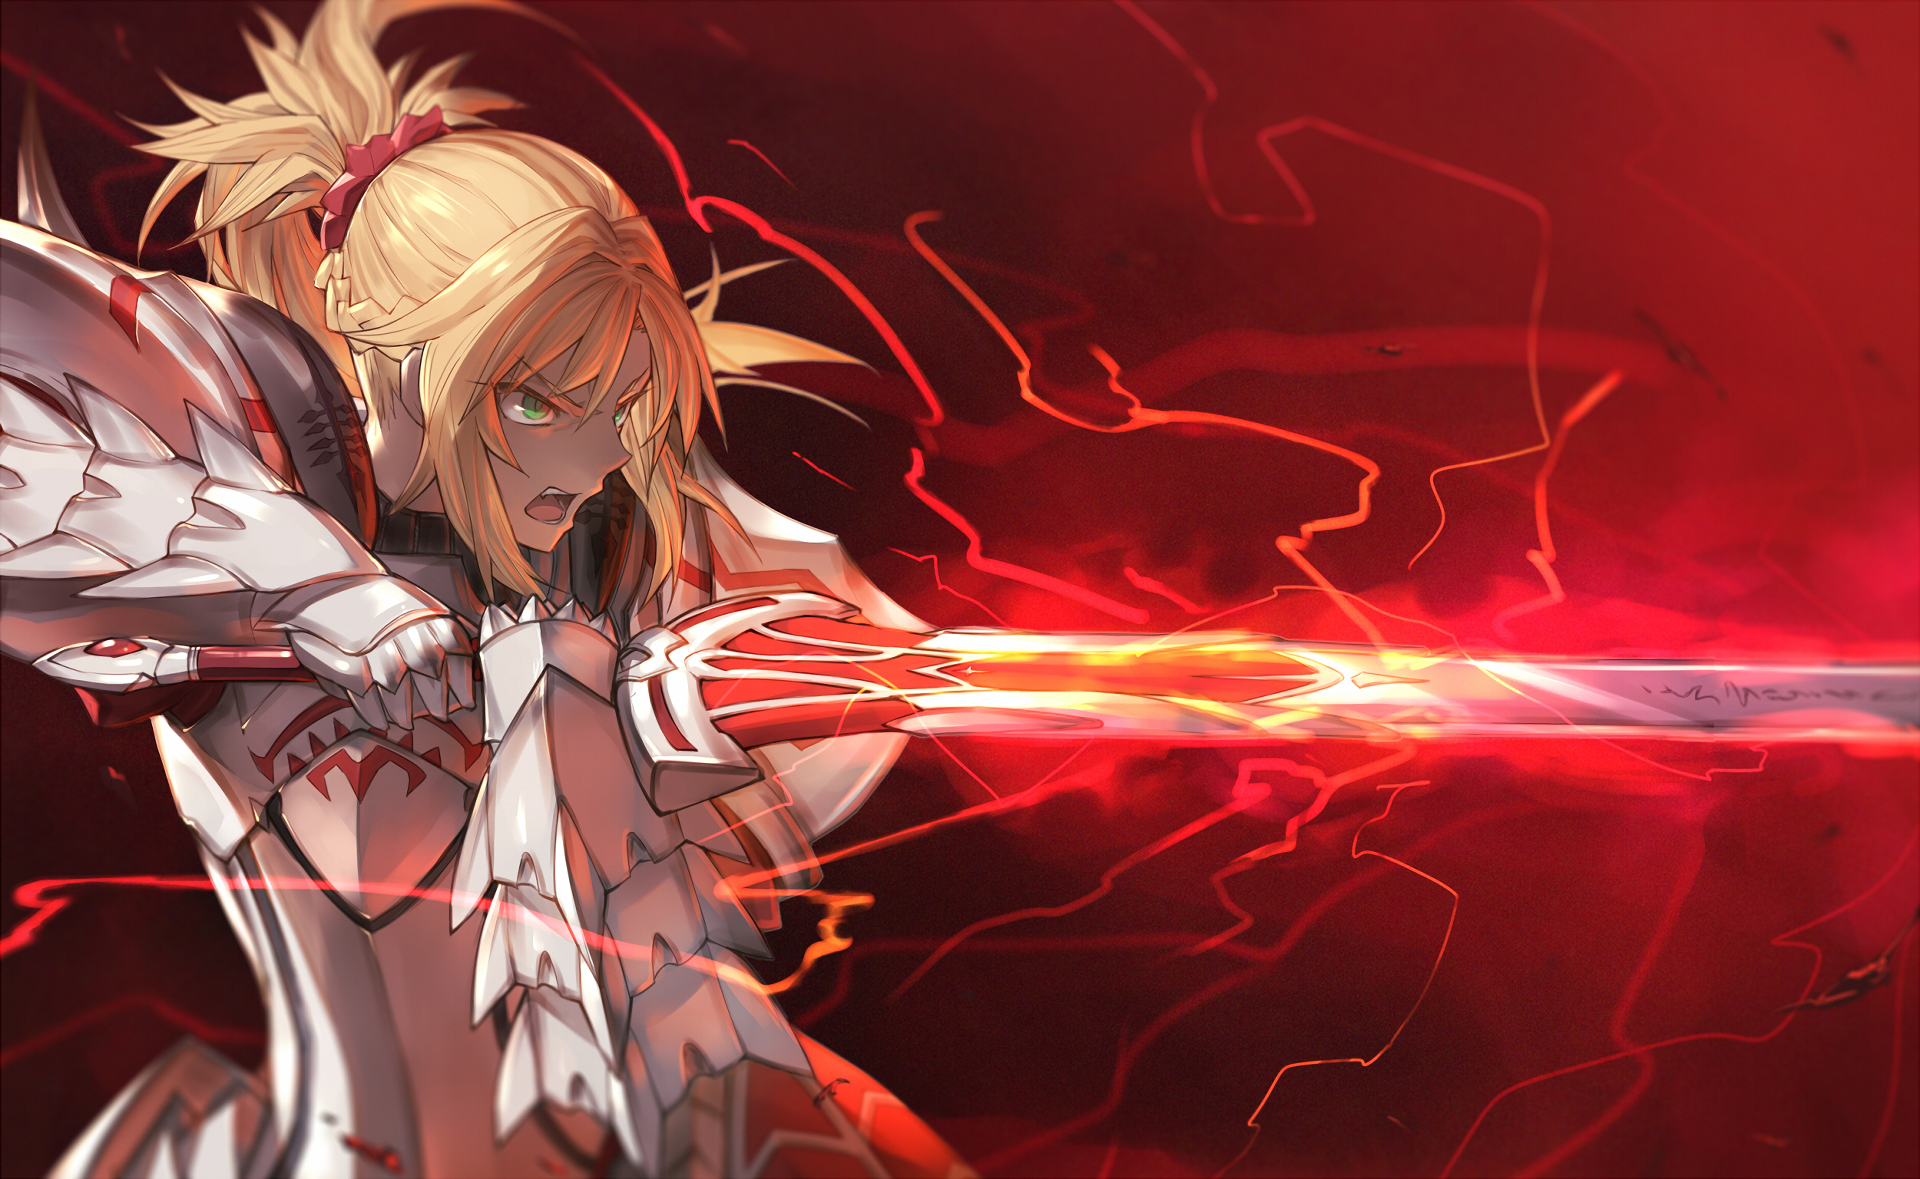 530 Fate/Apocrypha Mordred CUSTOM PLAYMAT ANIME PLAYMAT FREE SHIPPING 